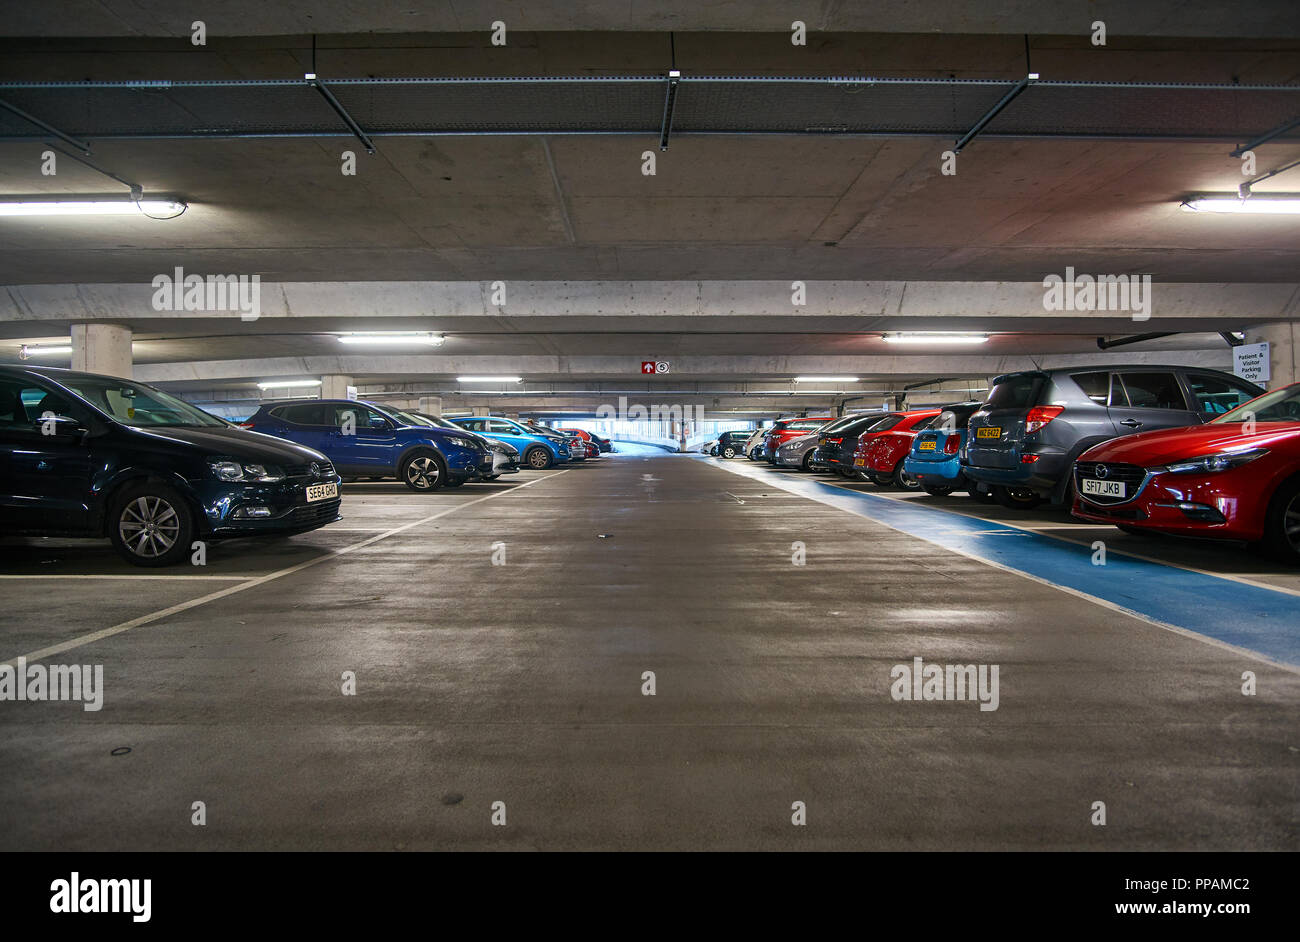 Underground multi storey car park / parking garage with cars parked on both sides. Stock Photo